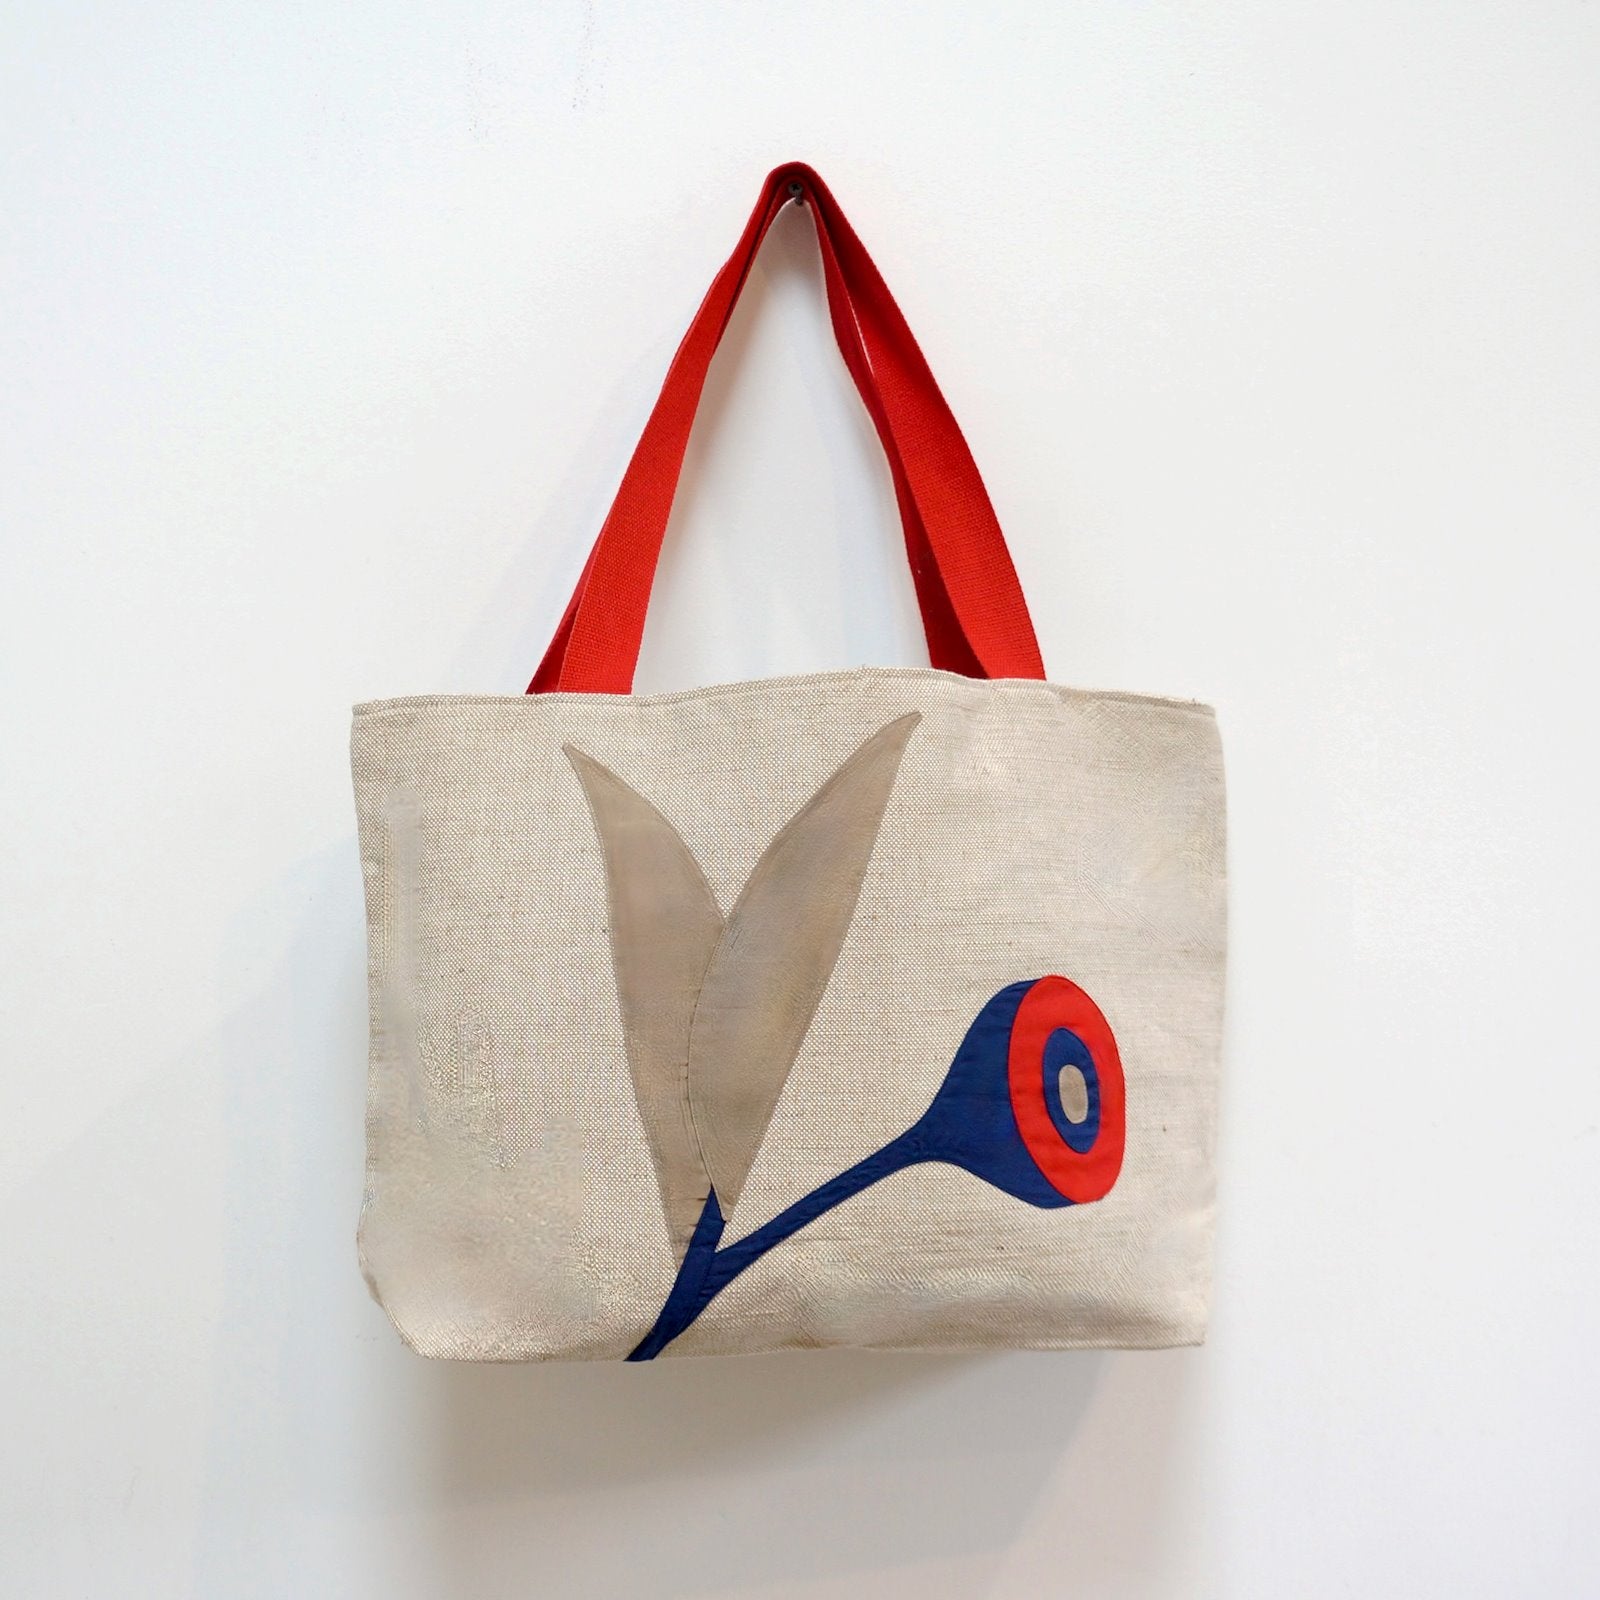 Gumnut Leaf Jute Tote in Blue and Red Bags and purses WEFTshop 